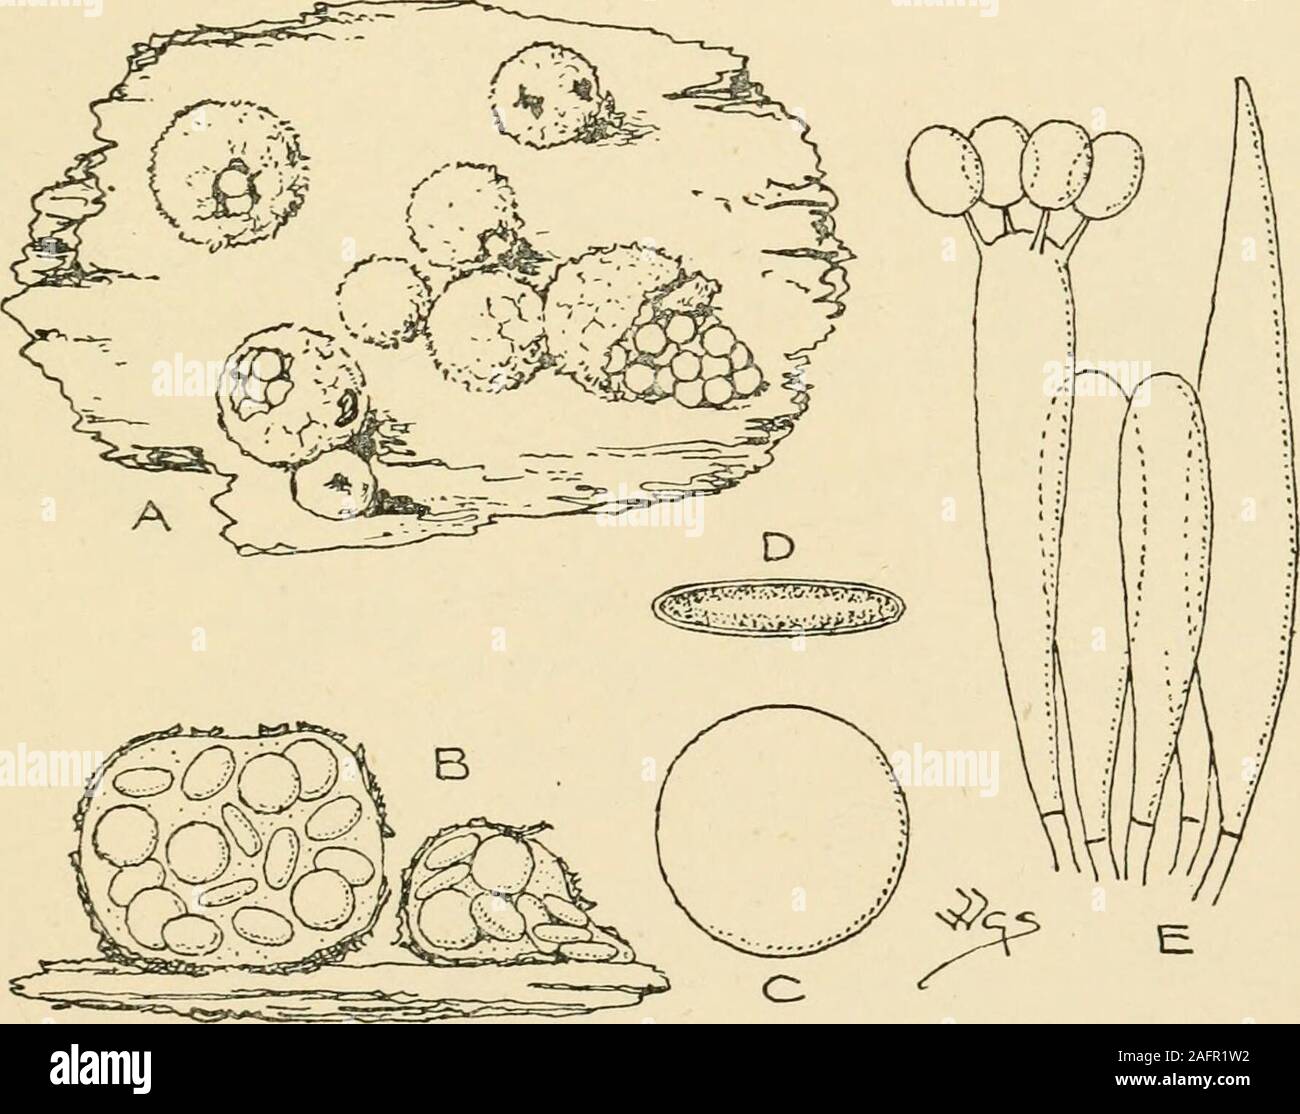 . Synopsis of the British Basidiomycetes ; a descriptive catalogue of the drawings and specimens in the Department of botany, British museum. d mature examples.X 3. c, peridiolum; d, section of ditto. X 12. e, basidia and spores. X 660. 1, peridium;2, epiphragm ; 3, peridiola ; 4, funiculus ; 5, hymenial layer lining peridiolum. Crucibuluvi NIDULARIACEiE 483 the apex as a flat epiphragm. Peridiola numerous, attached to theinner wall of the peridium by a long cord which originates from adepression in a central nipple-like tubercle on the under side of theperidiolum. (Fig. 136.) 2092. C. vulgare Stock Photo